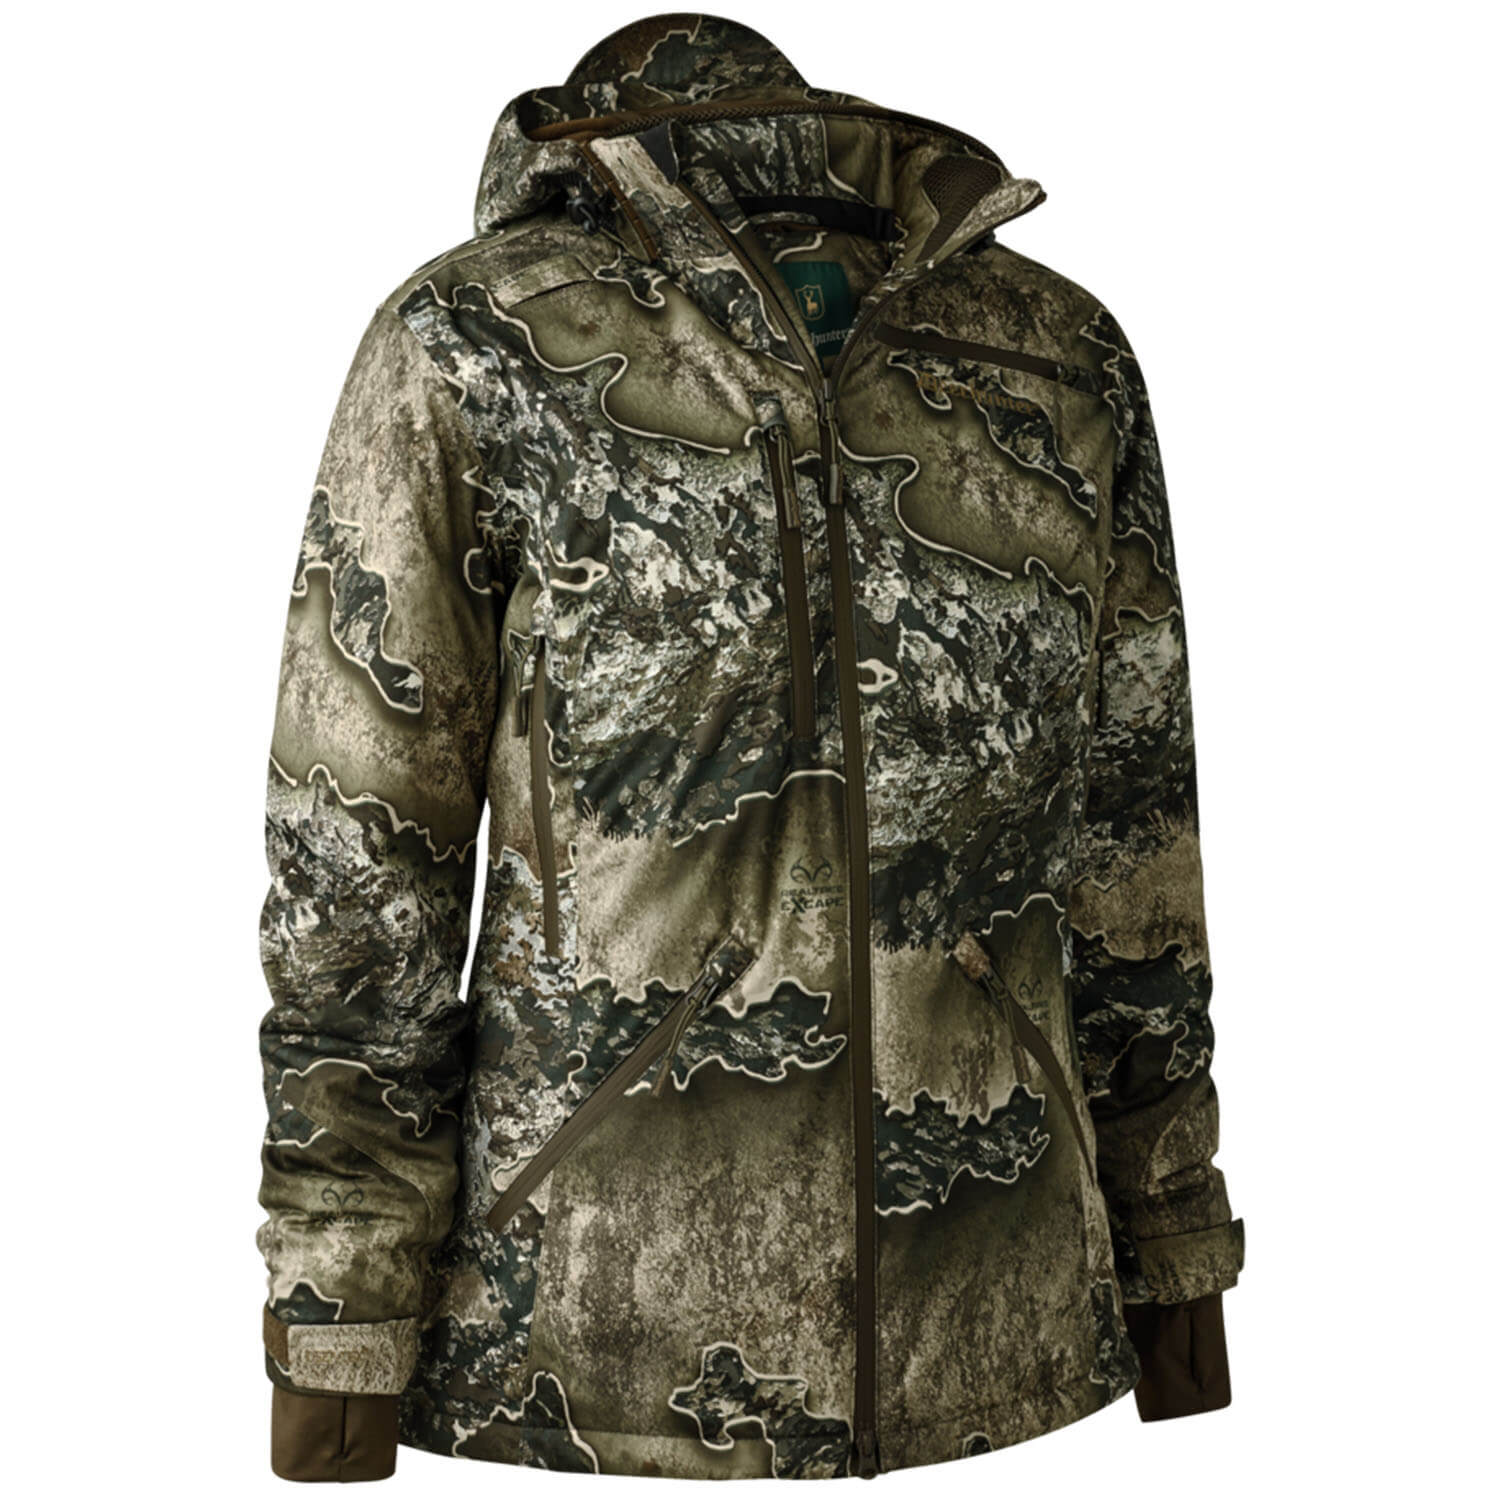 Deerhunter winter jacket Lady Excape (realtree excape) - For Ladies